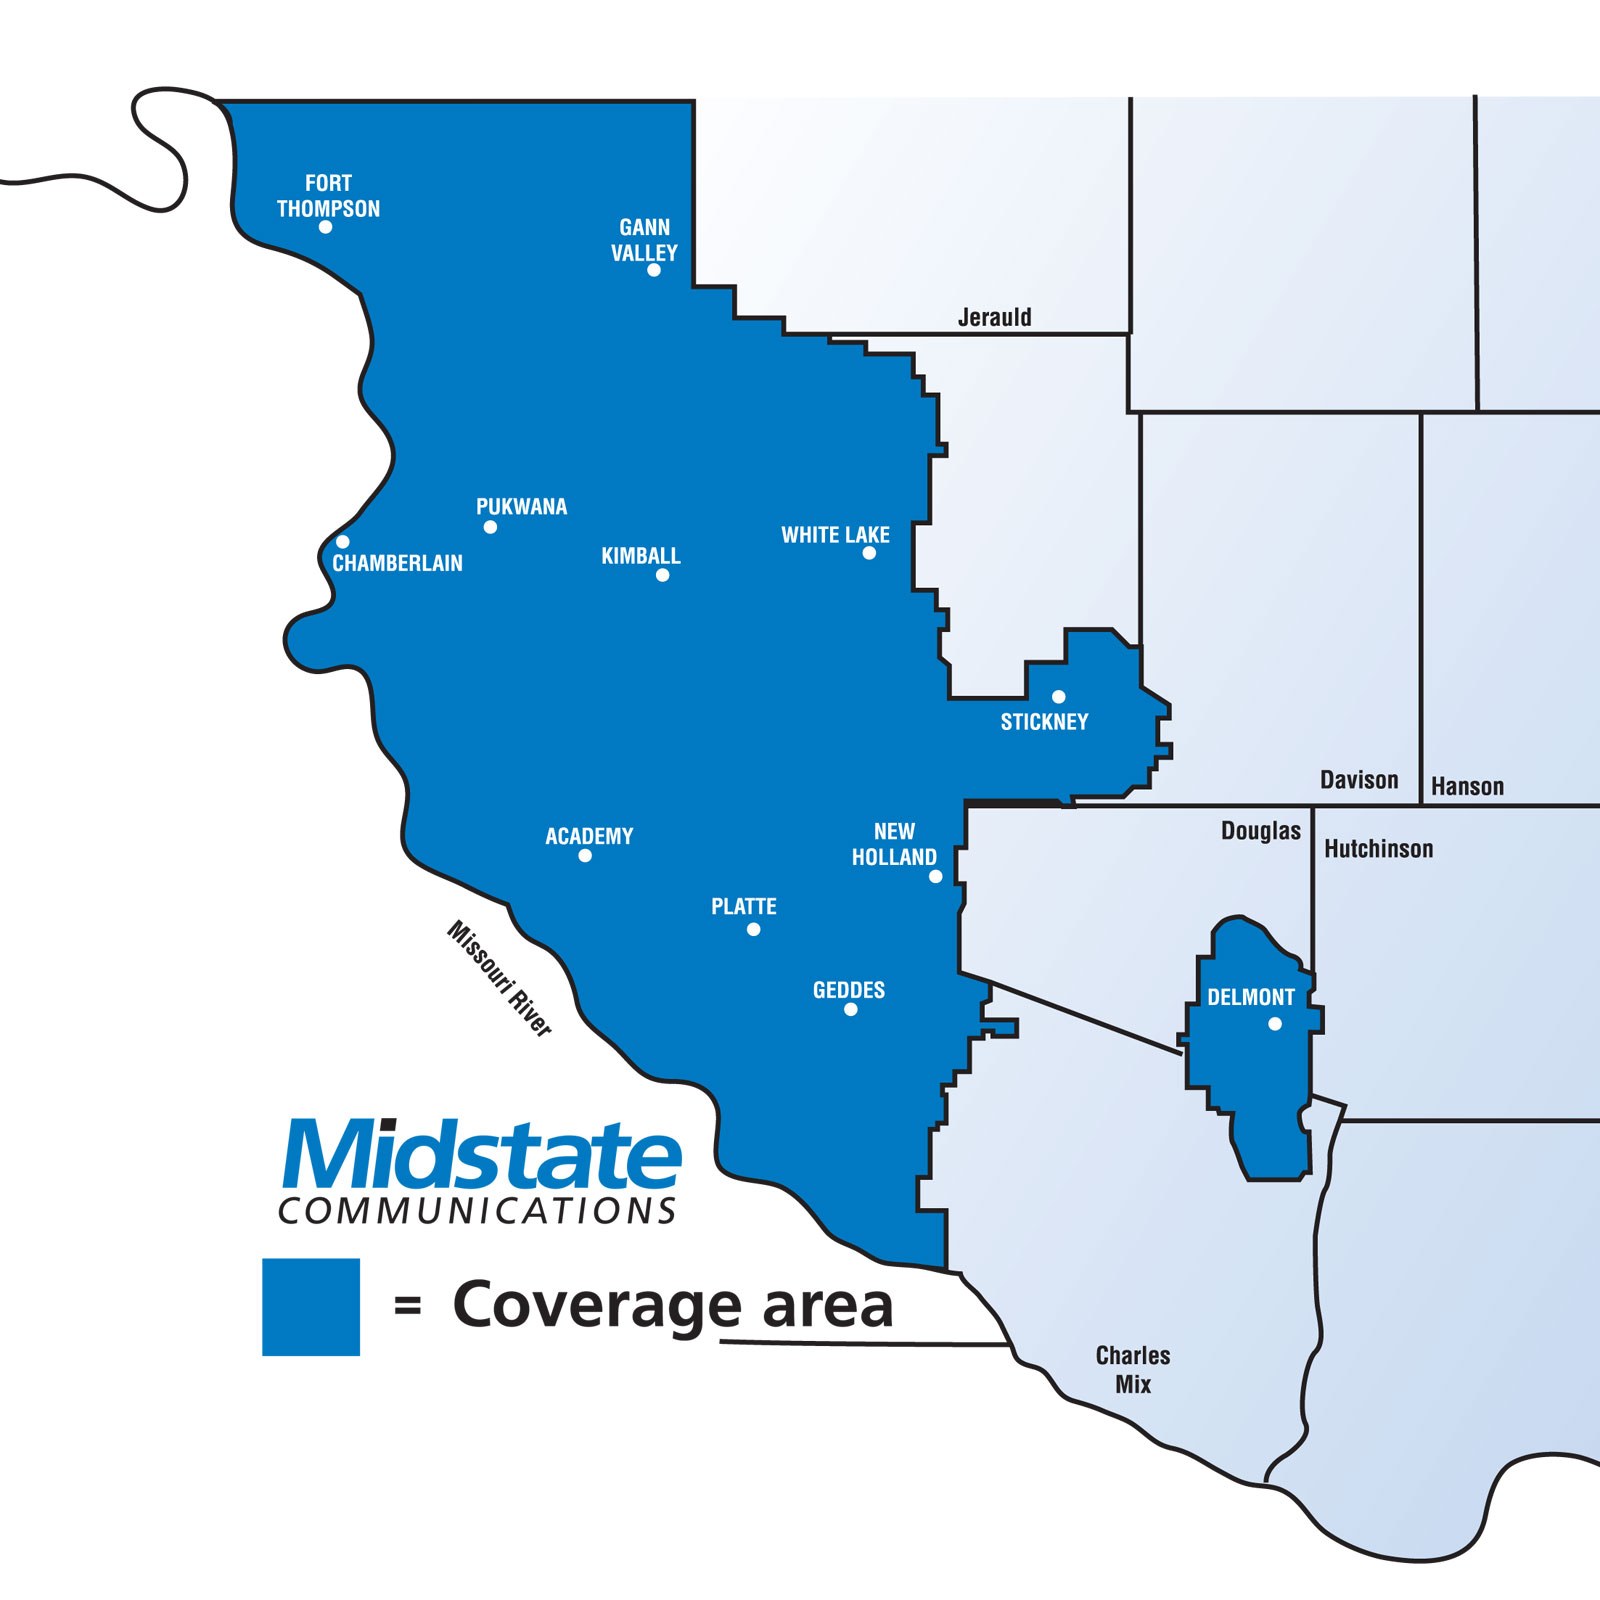 Midstate Communications coverage area map